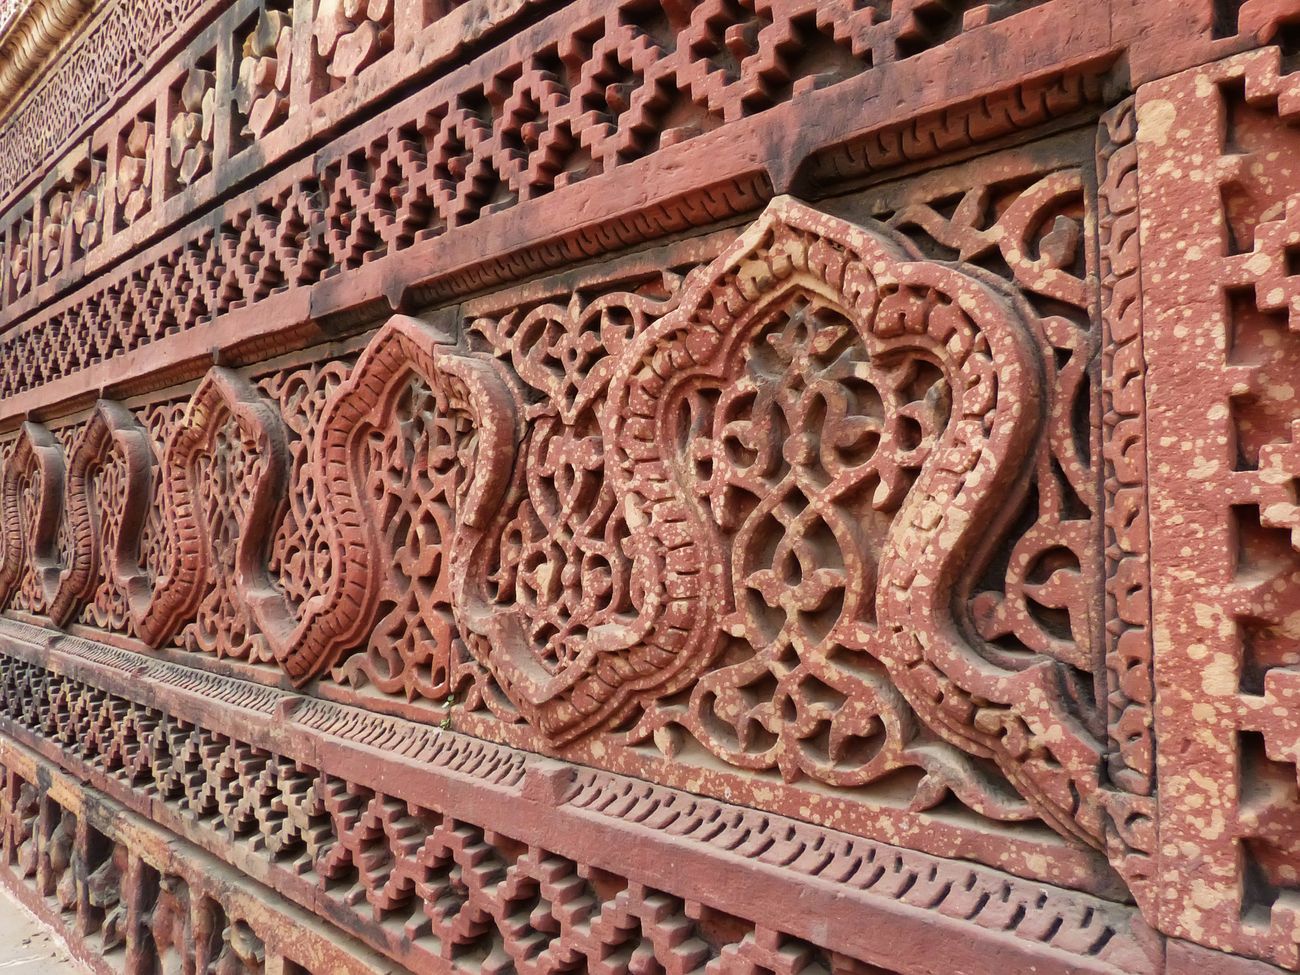 detail of carving on alai gate wall at qutub minar complex16